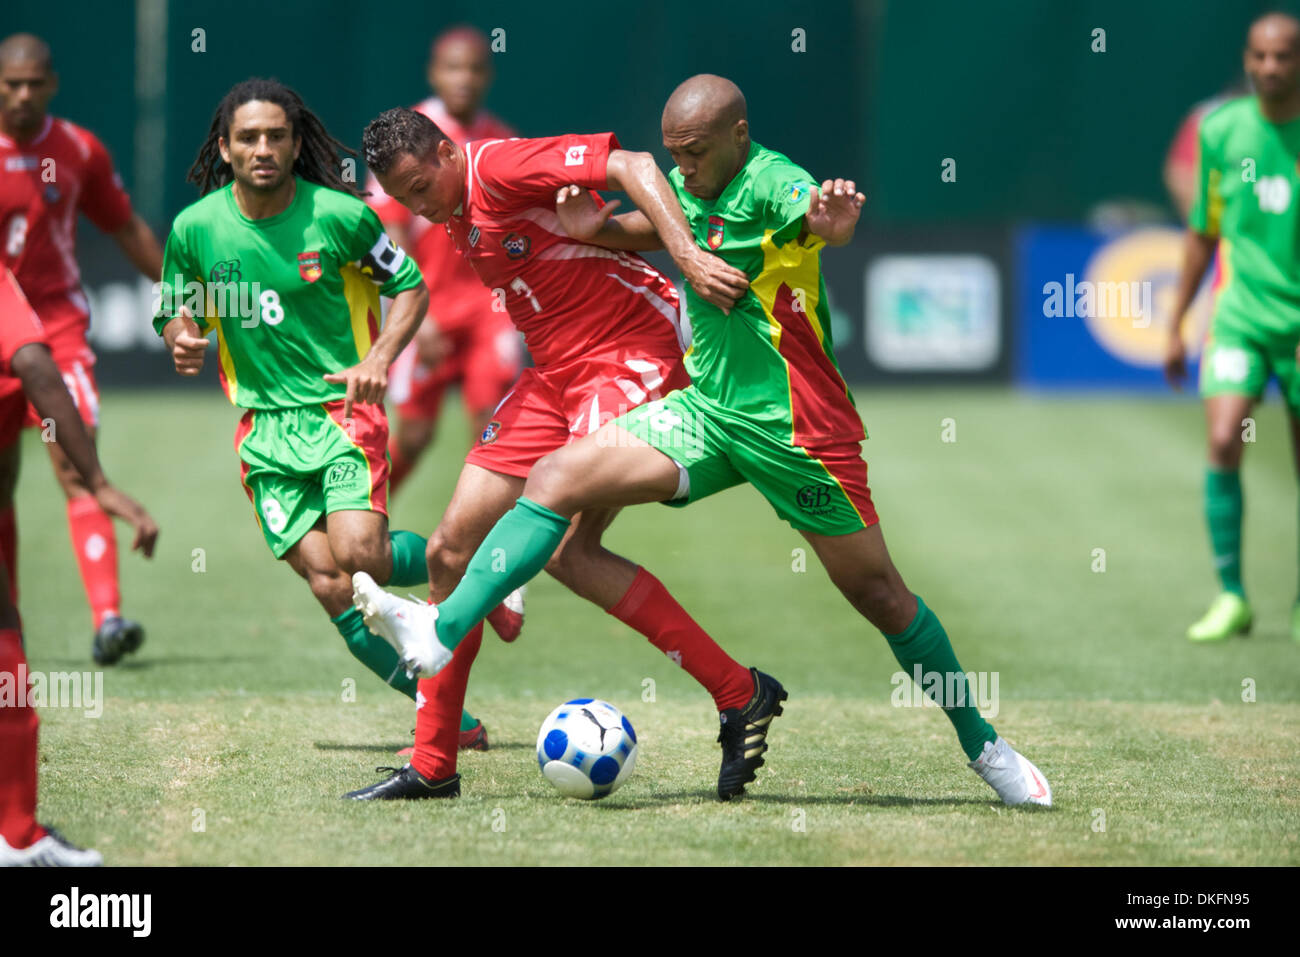 Jul 05, 2009 - Oakland, California, USA - Panama forward BLAS PEREZ holds off Guadeloupe defender THOMAS GAMIETTE in CONCACAF Gold Cup Group C action at Oakland-Alameda County Coliseum. (Credit Image: © Matt Cohen/Southcreek Global/ZUMA Press) Stock Photo